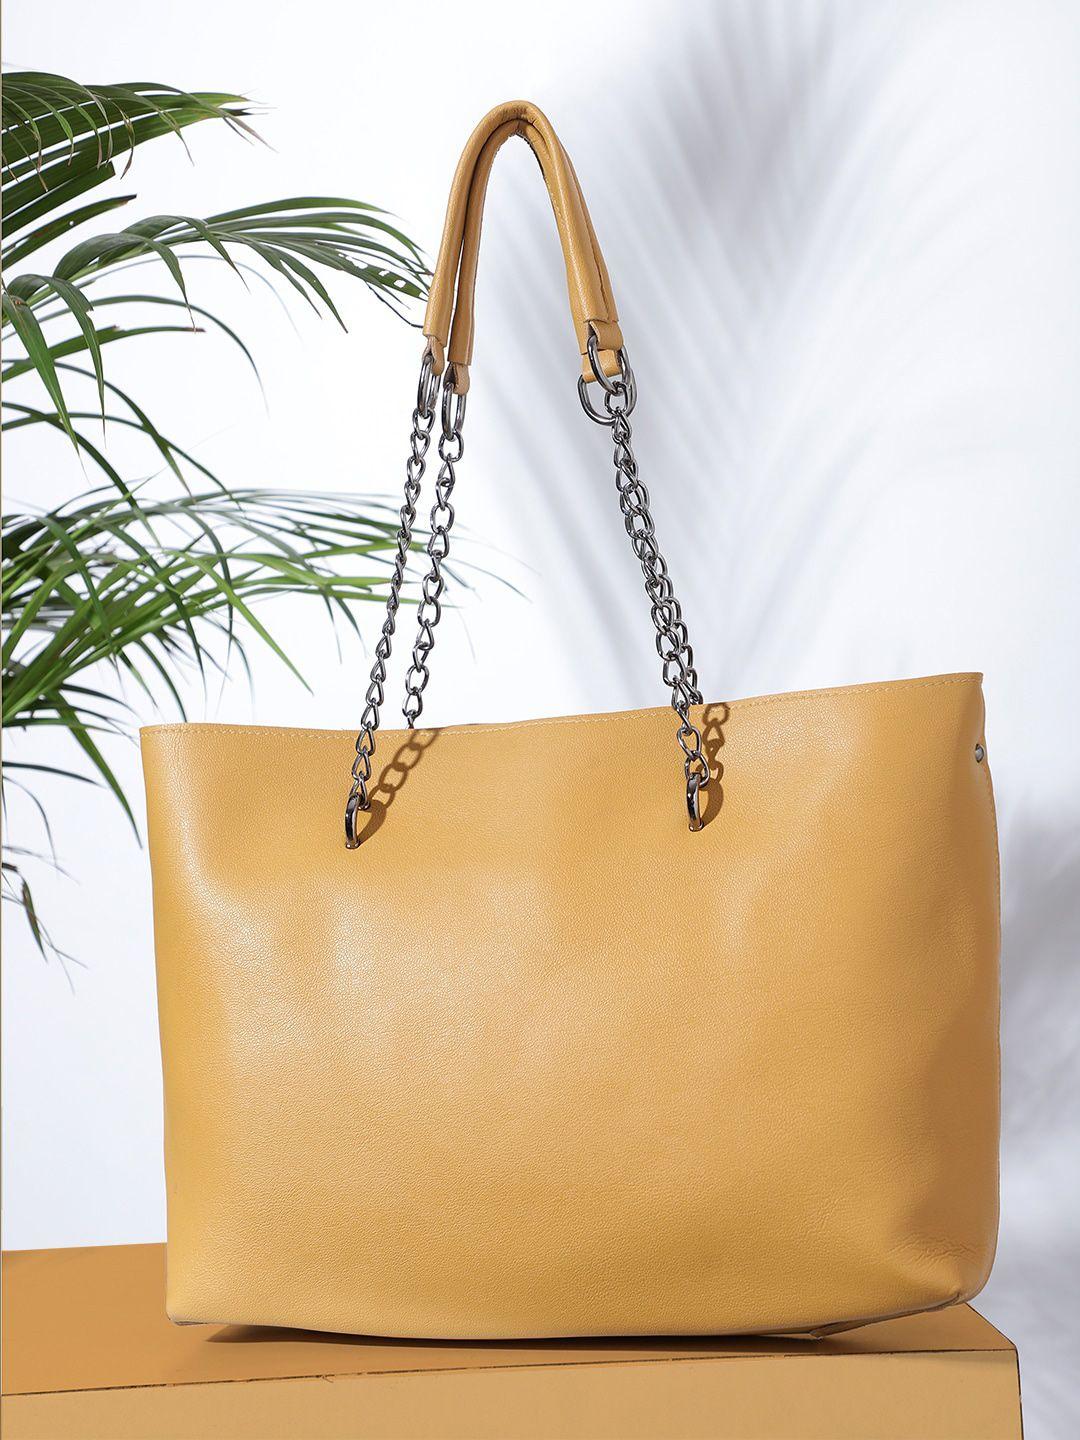 bag pepper yellow pu structured leather shoulder bag